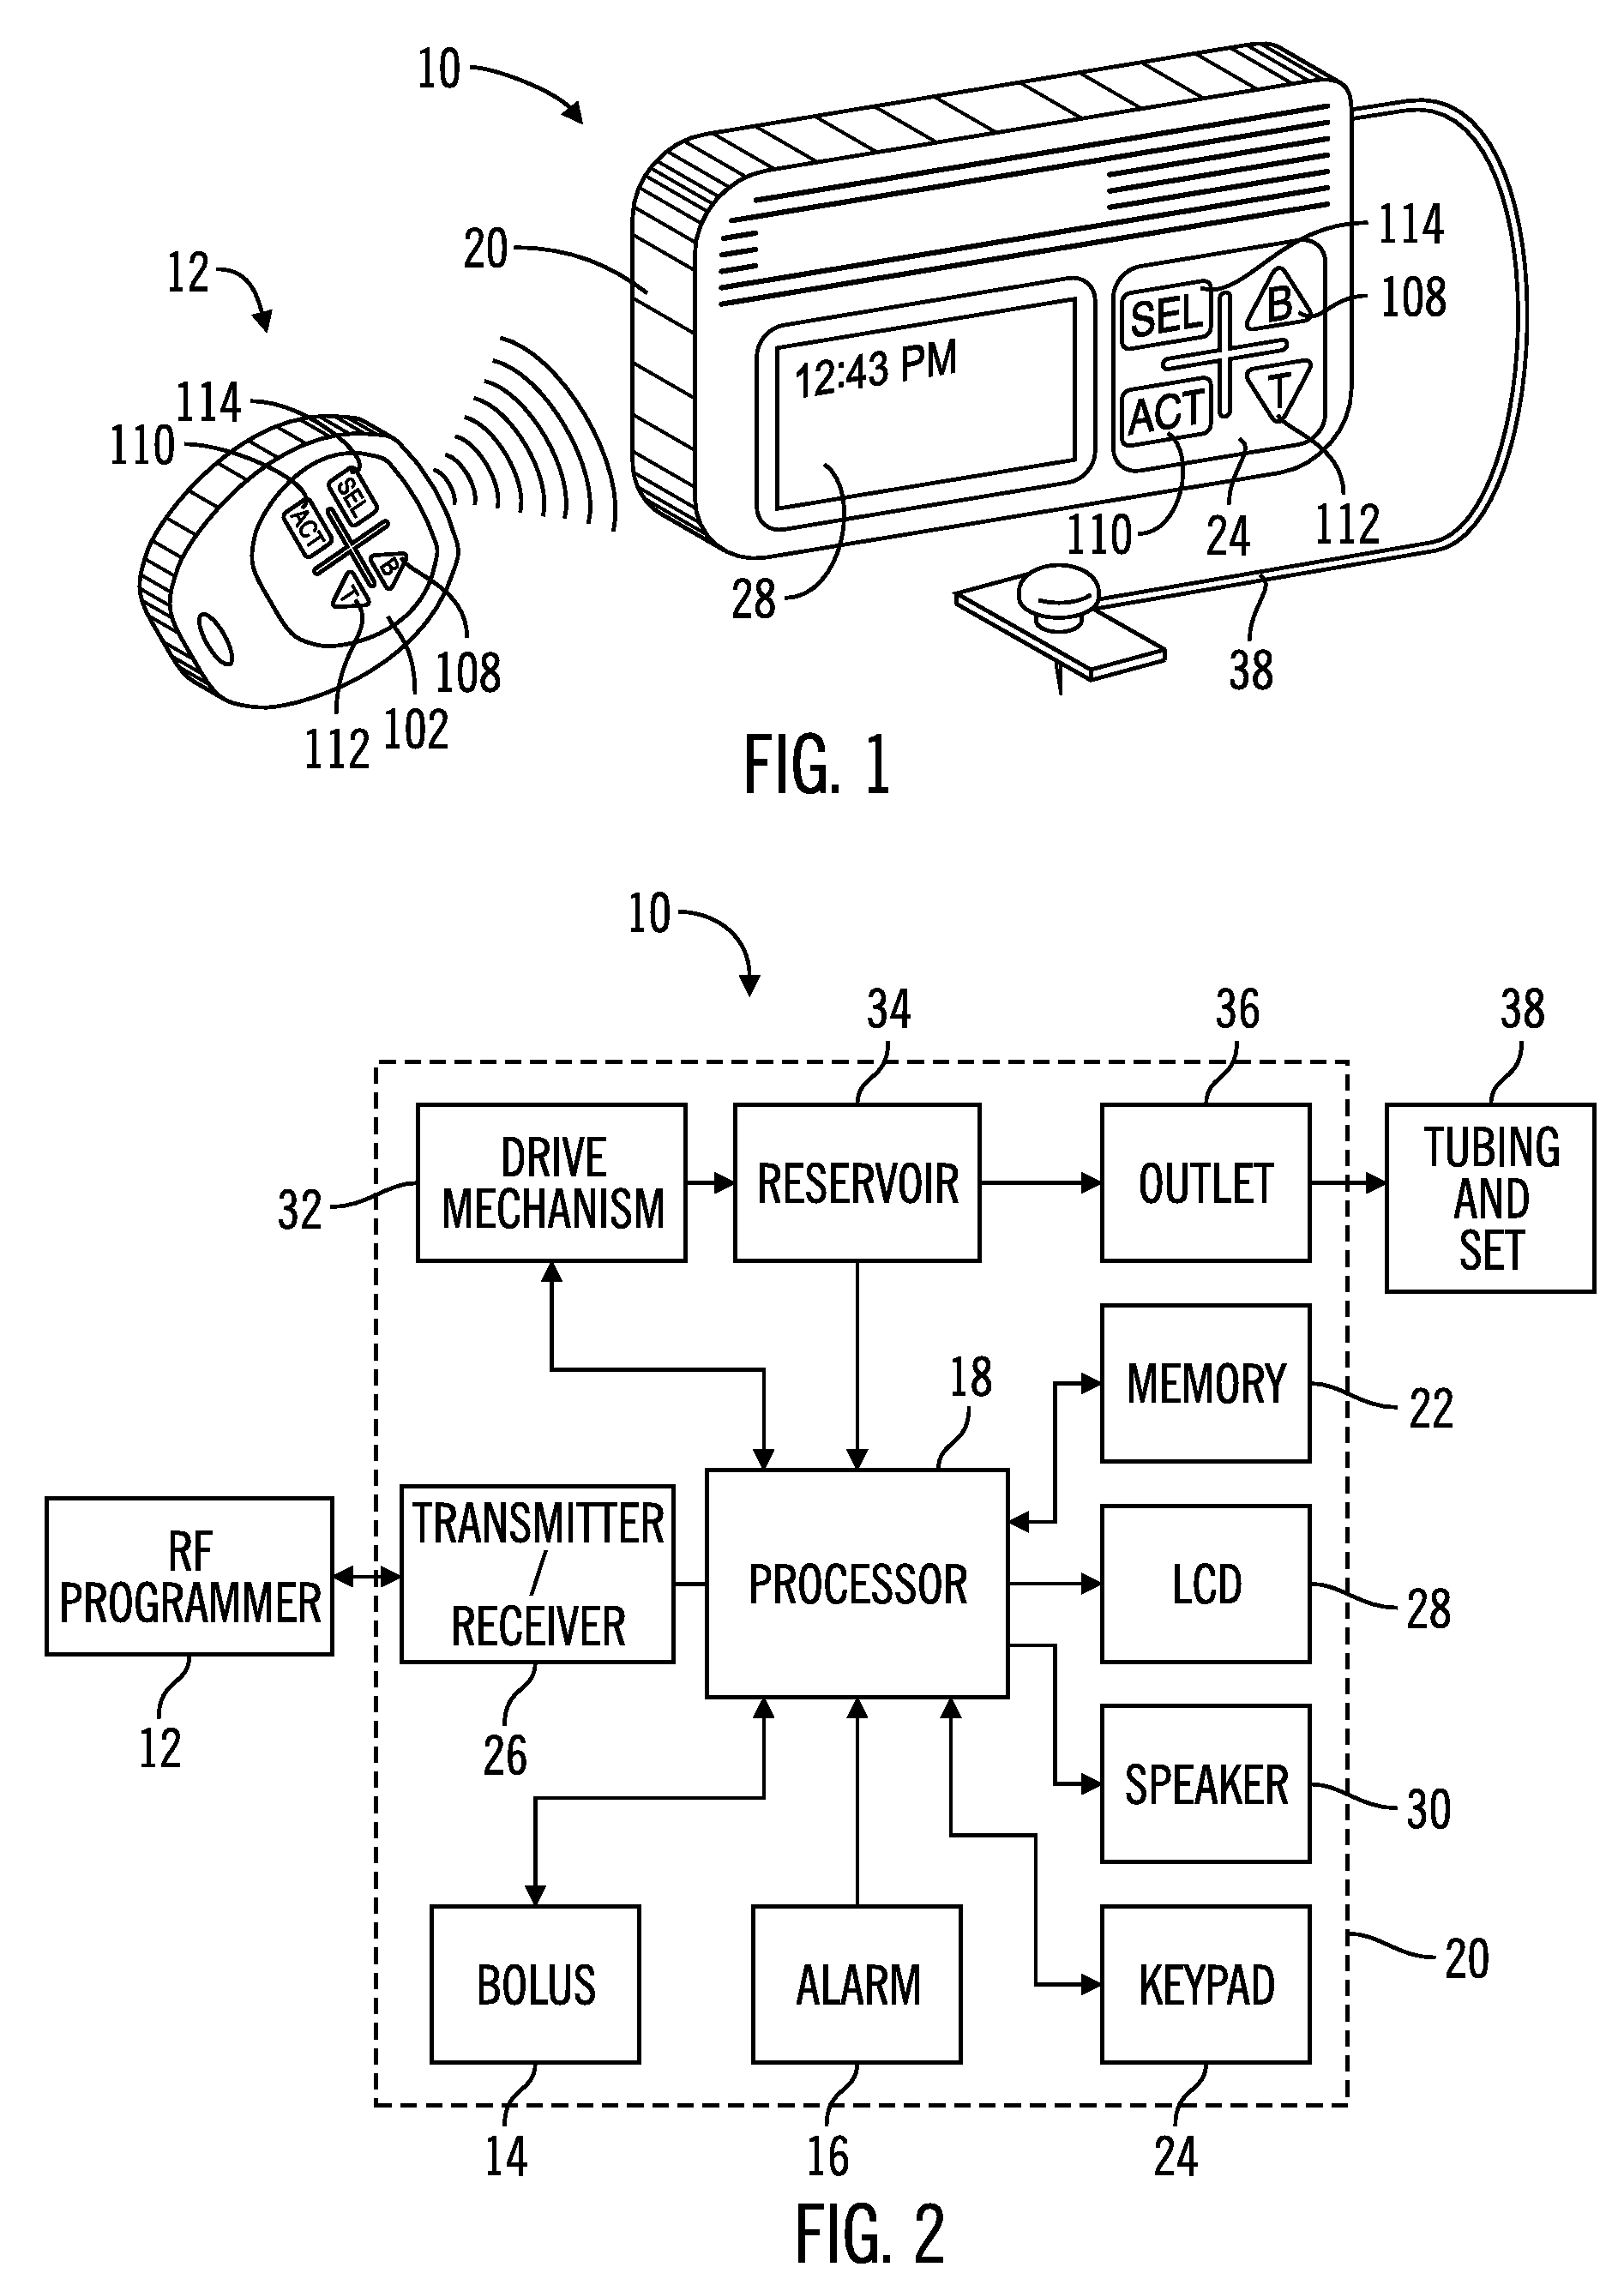 External infusion device with programmable capabilities to time-shift basal insulin and method of using the same